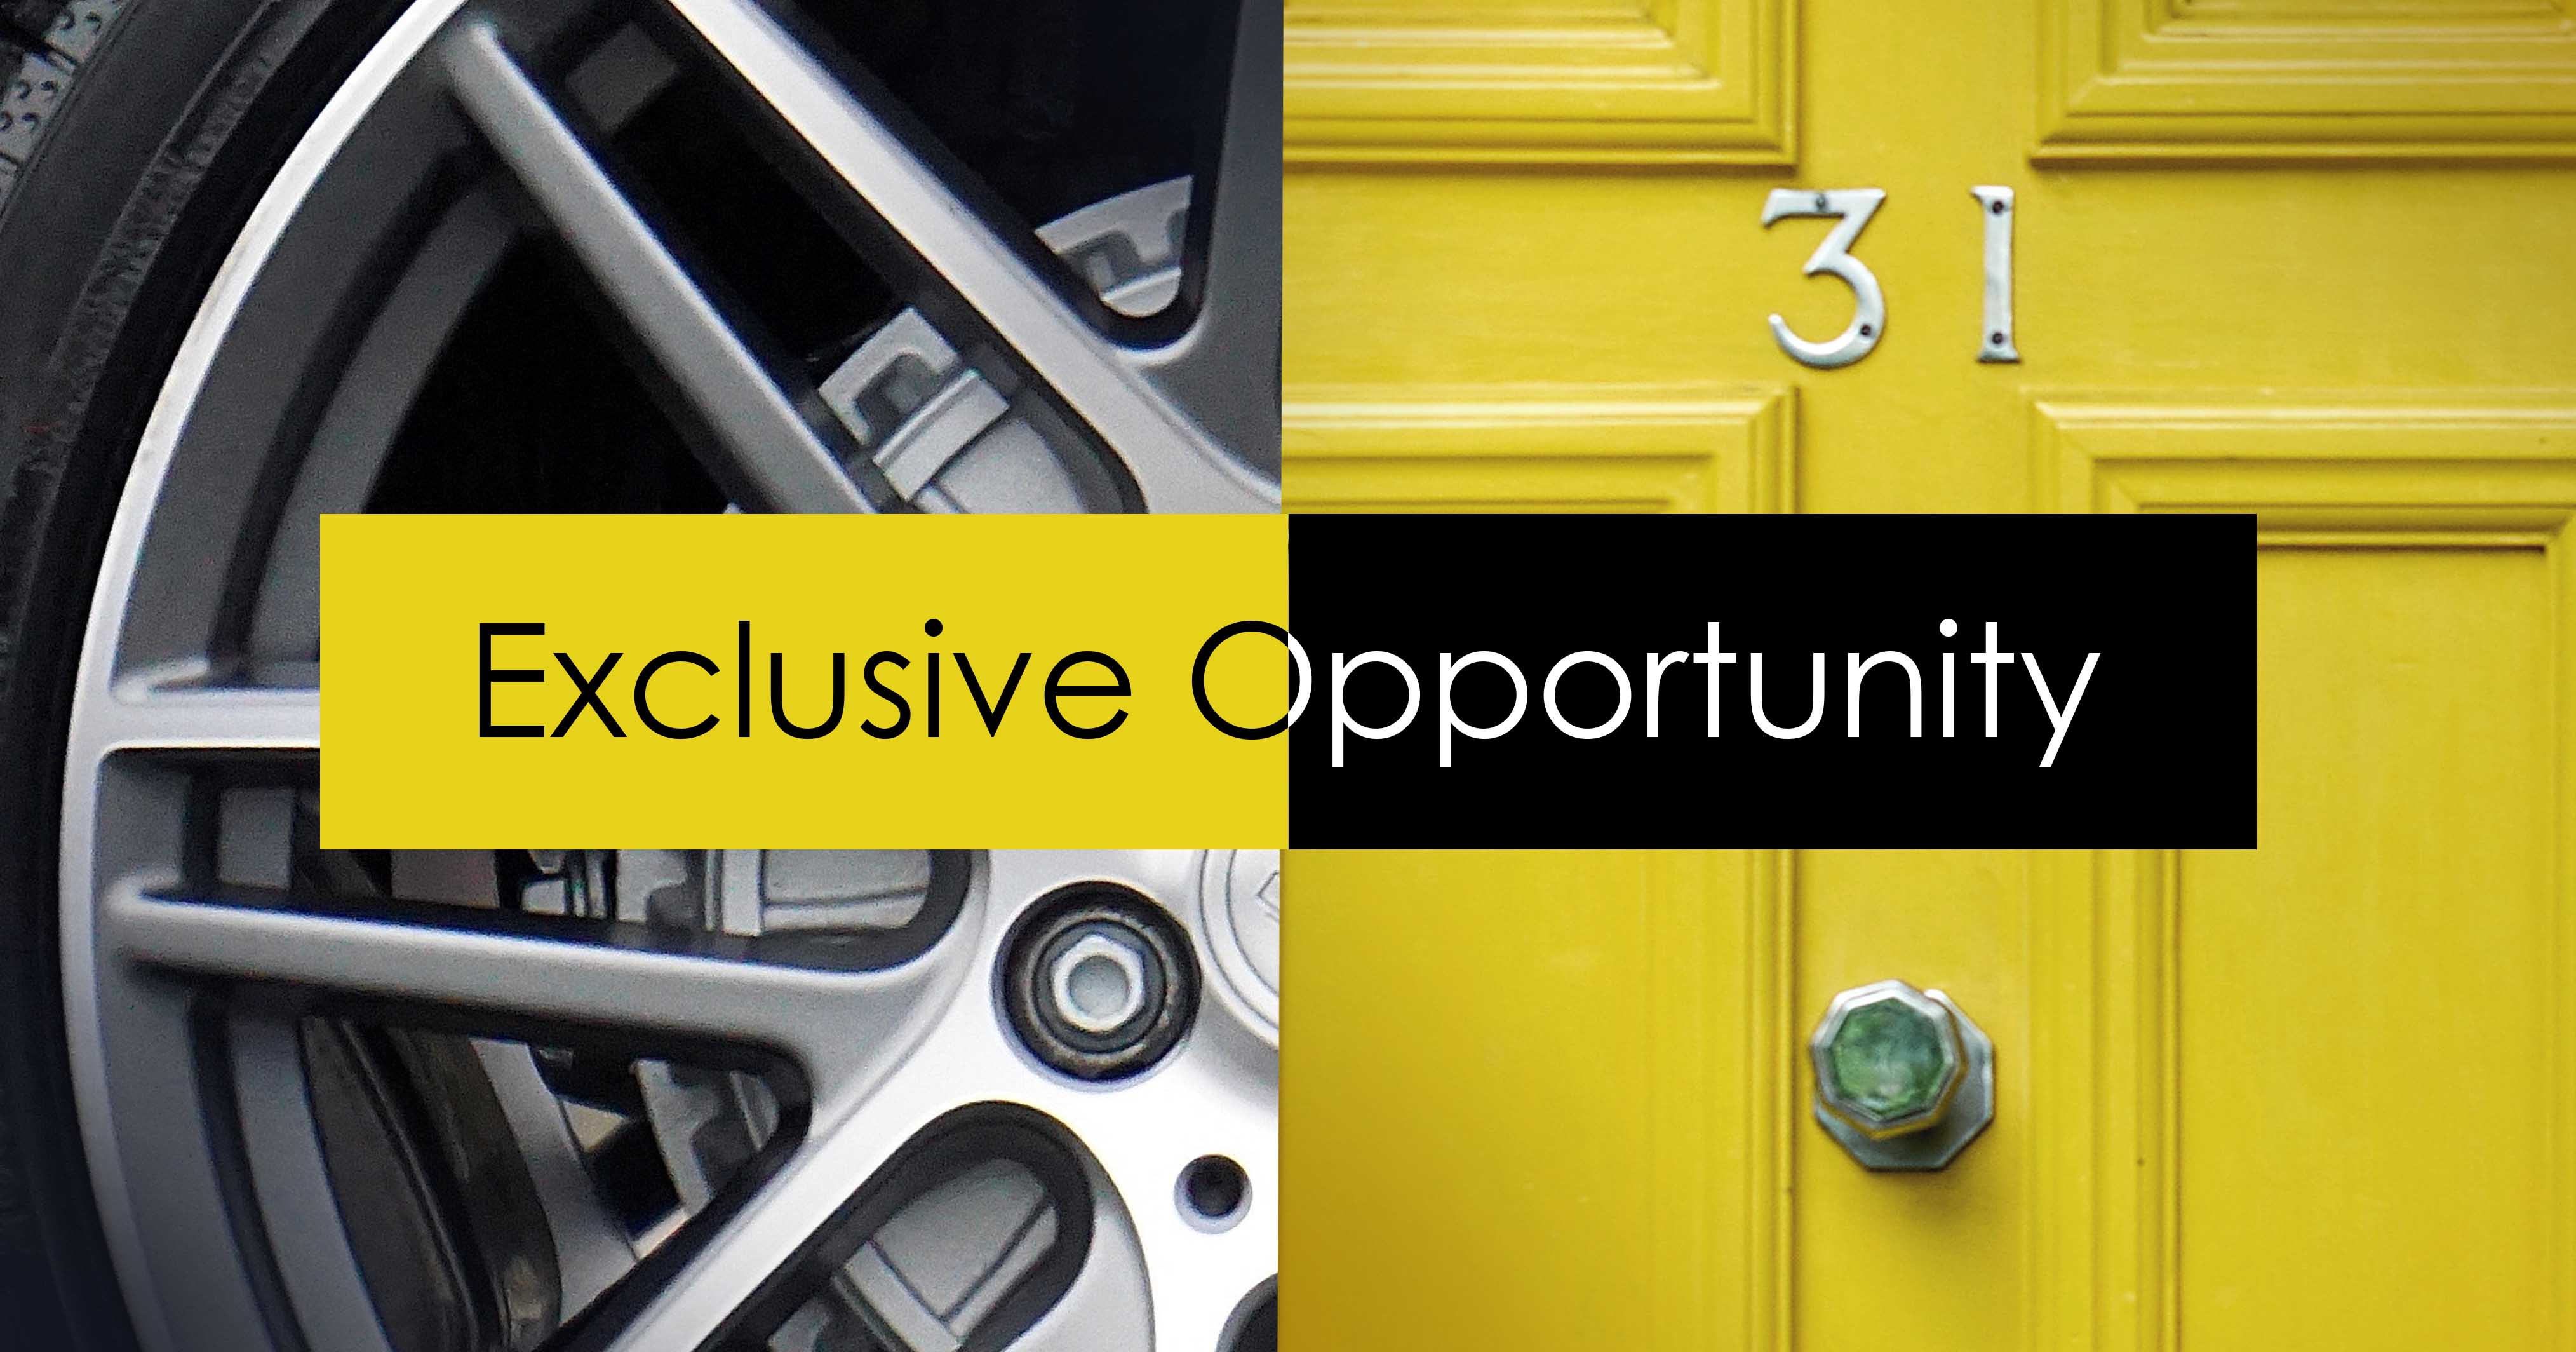 Yellow and black graphic depicting the words 'Exclusive Opportunity'.